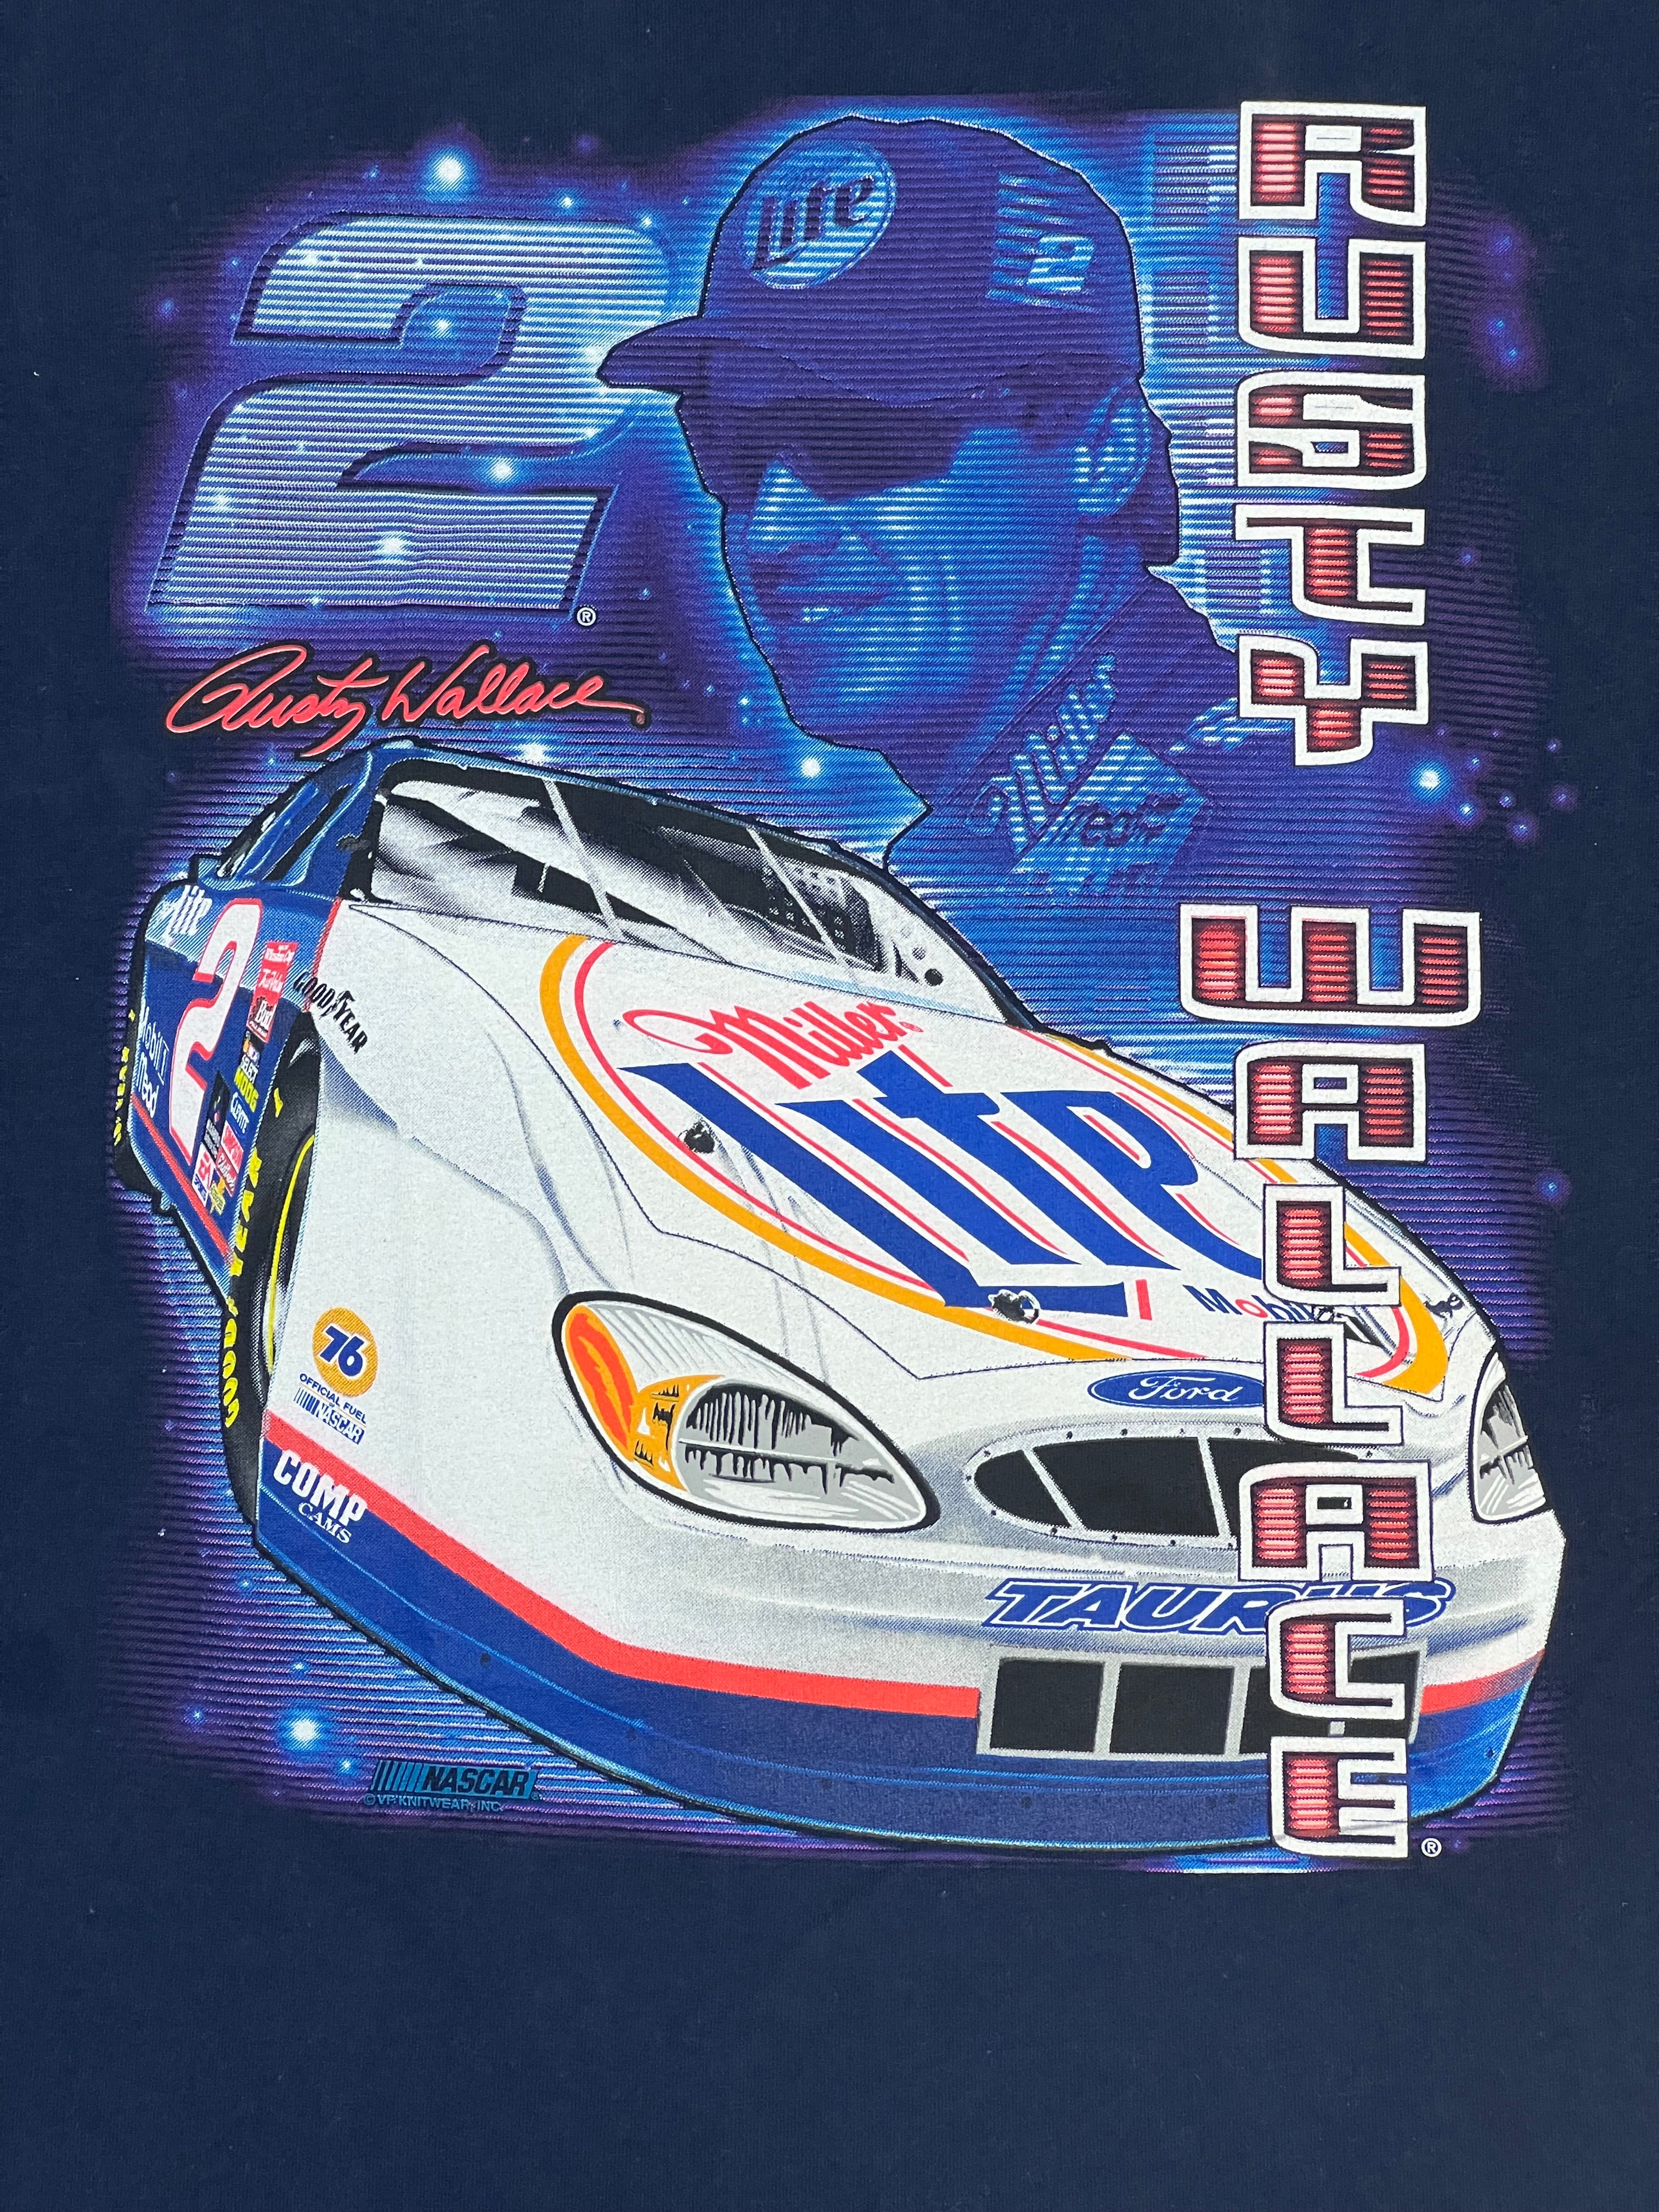 Read it, Rusty Wallace Miller, light, Chase Tee